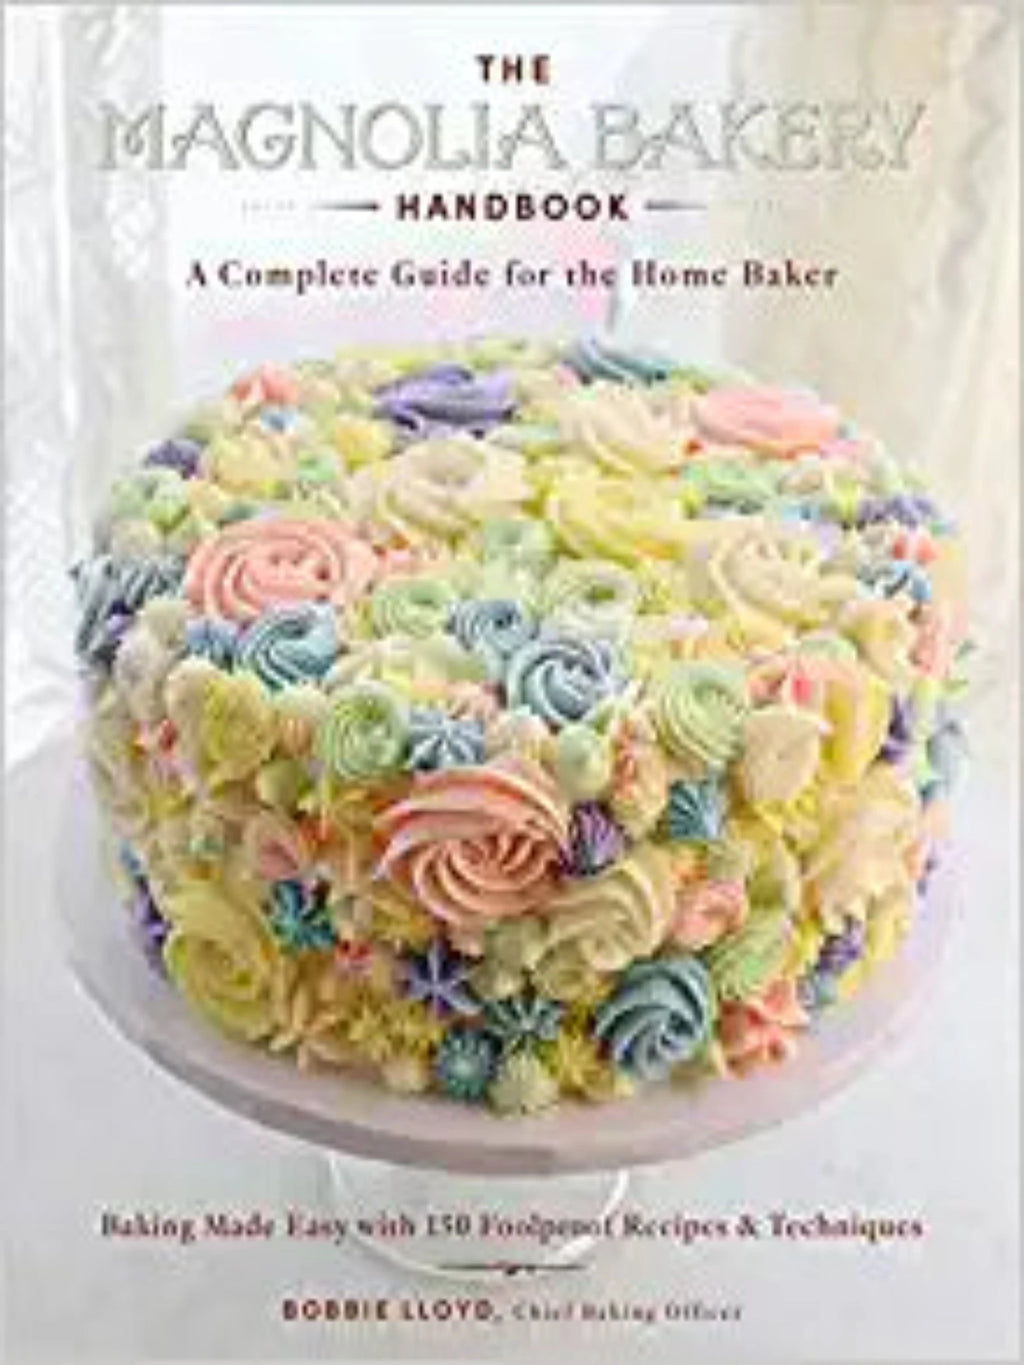 Front cover of book featuring colorfully decorated cake